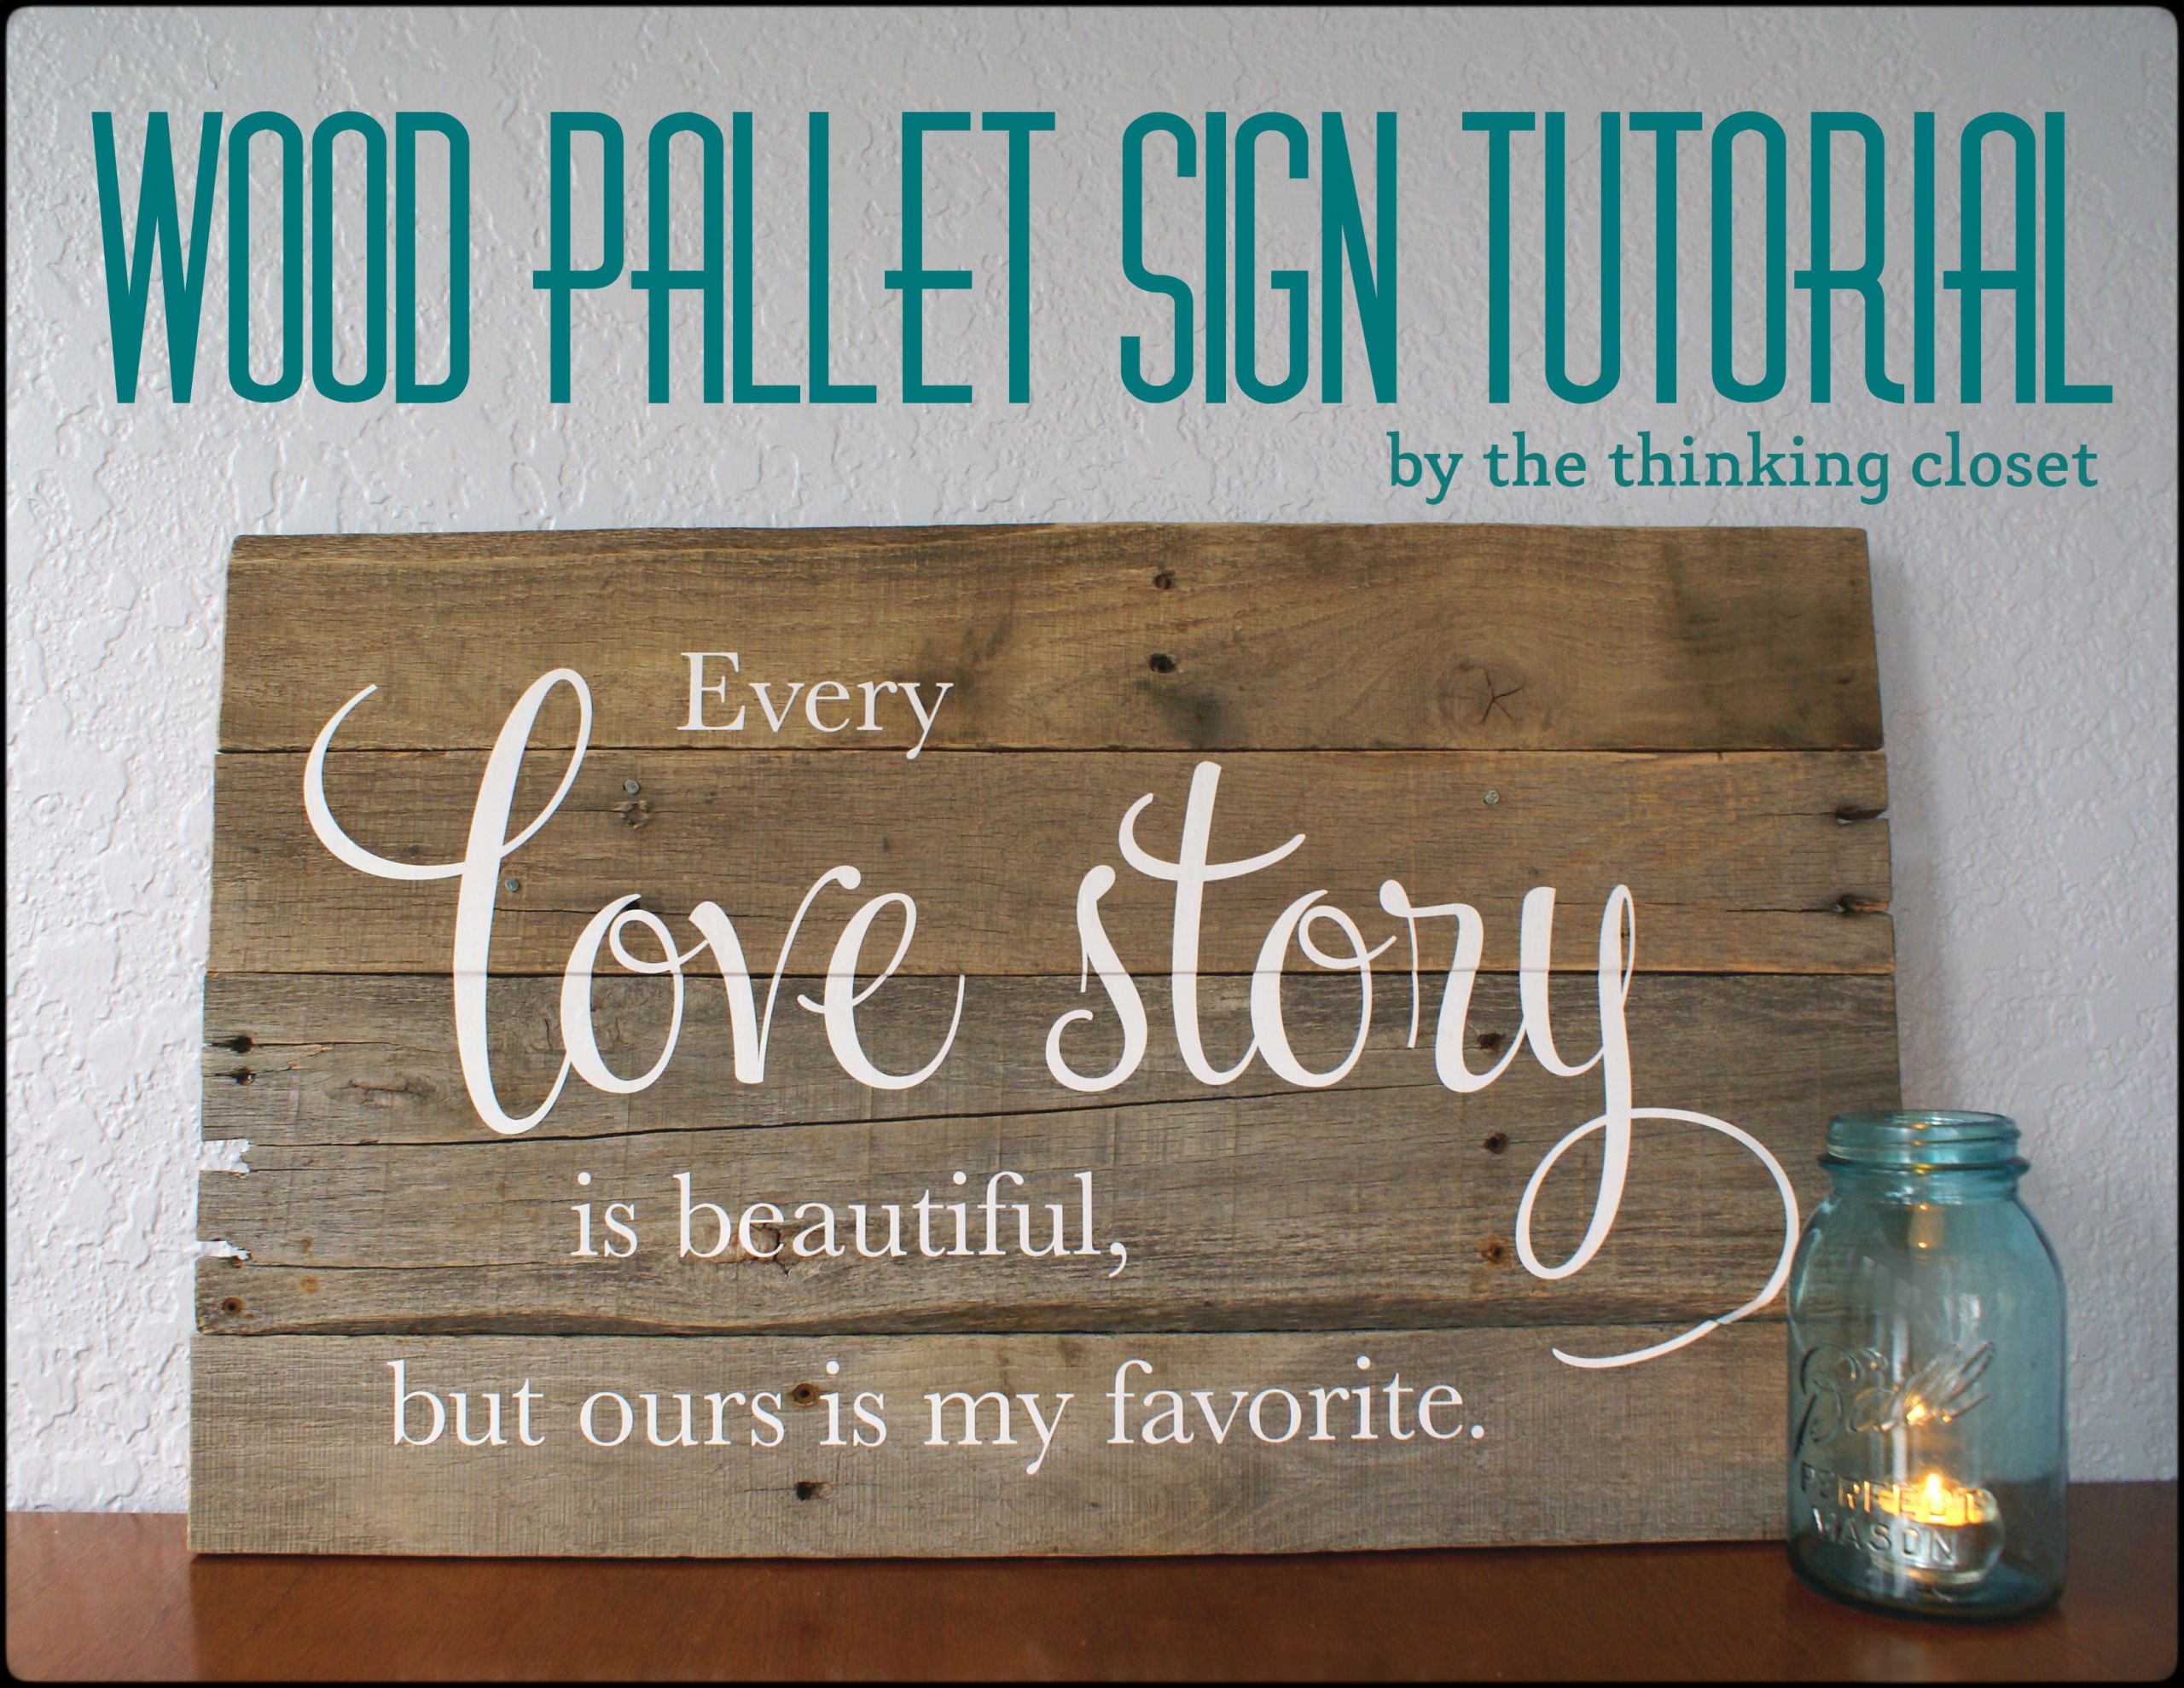 DIY Wood Pallet Sign
 The Menu Planner to Rule Them All the thinking closet